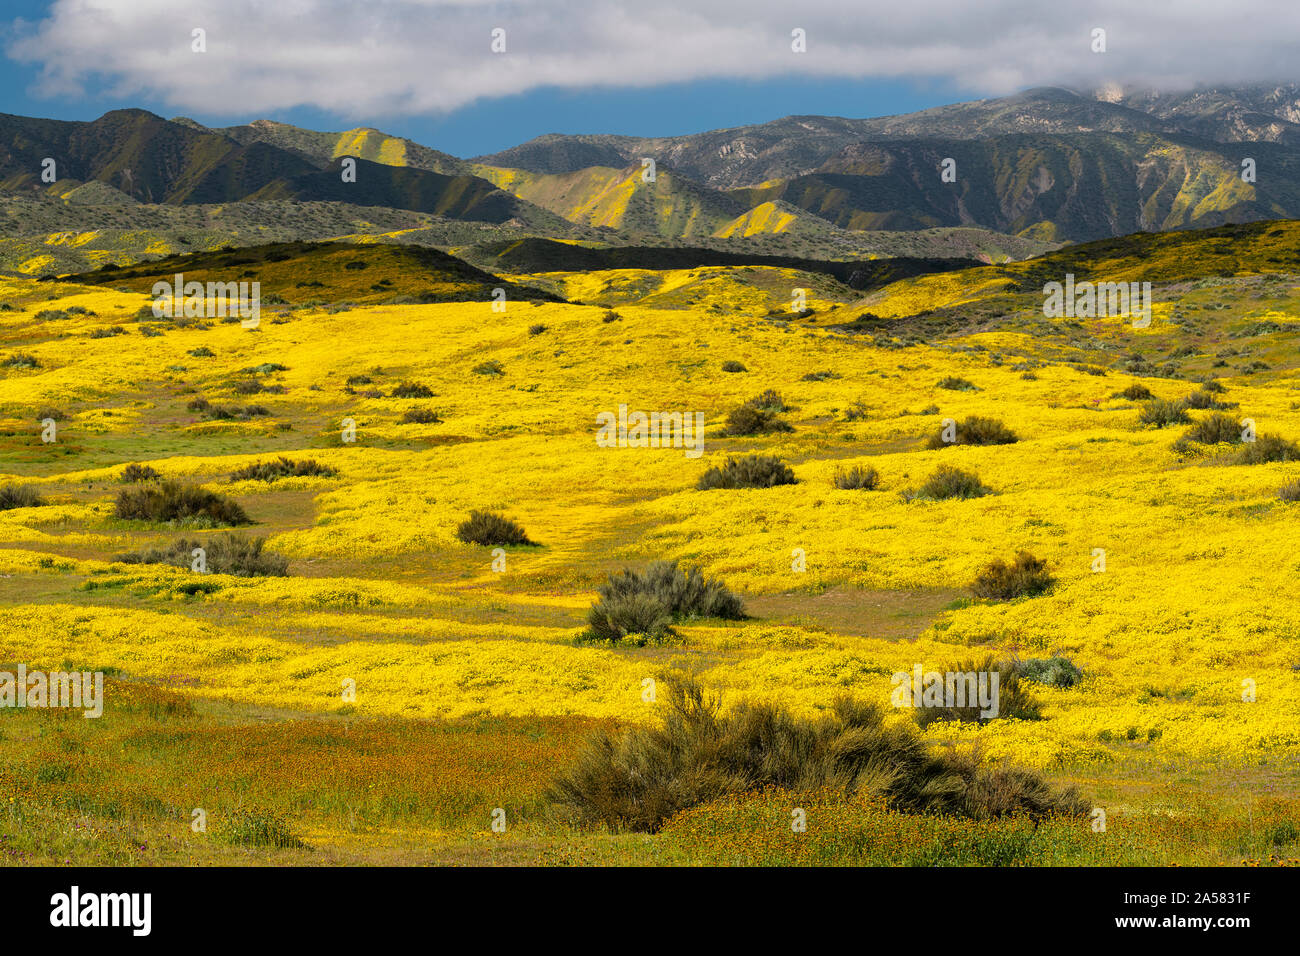 Landscape with mountains of Caliente Range and yellow wildflowers, Carrizo Plain National Monument, California, USA Stock Photo